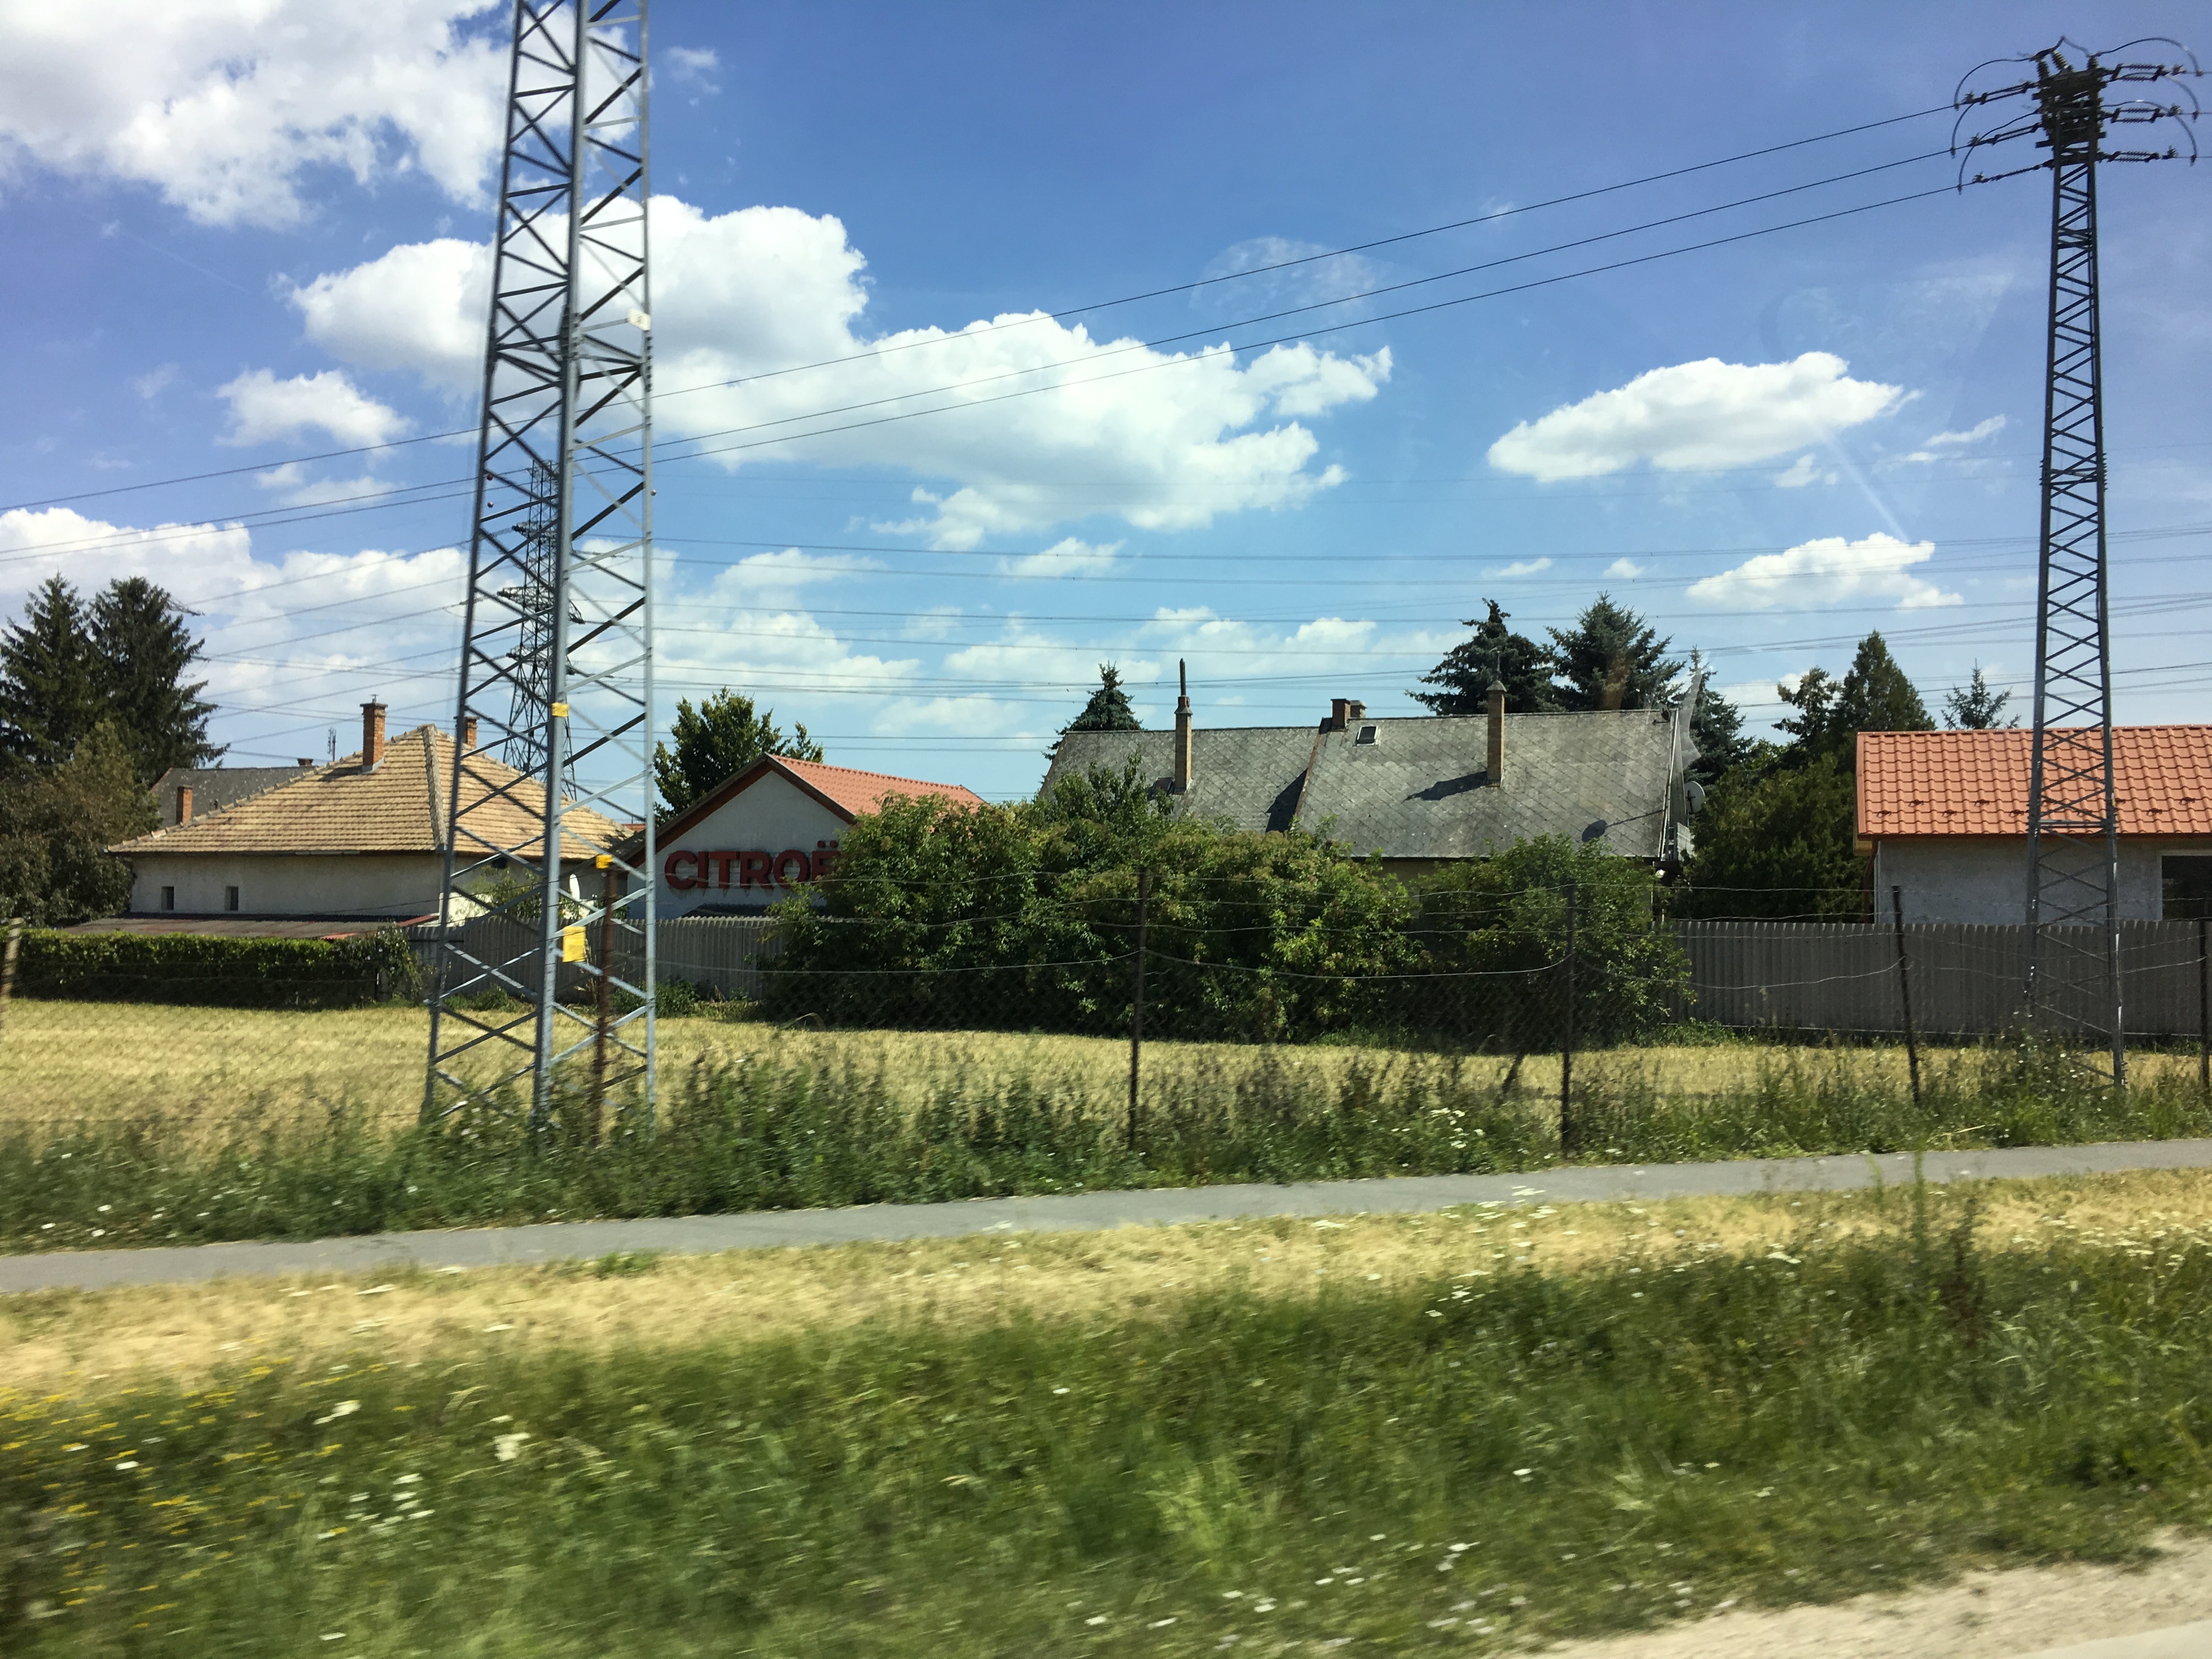 Photo of the countryside South-West of Budapest